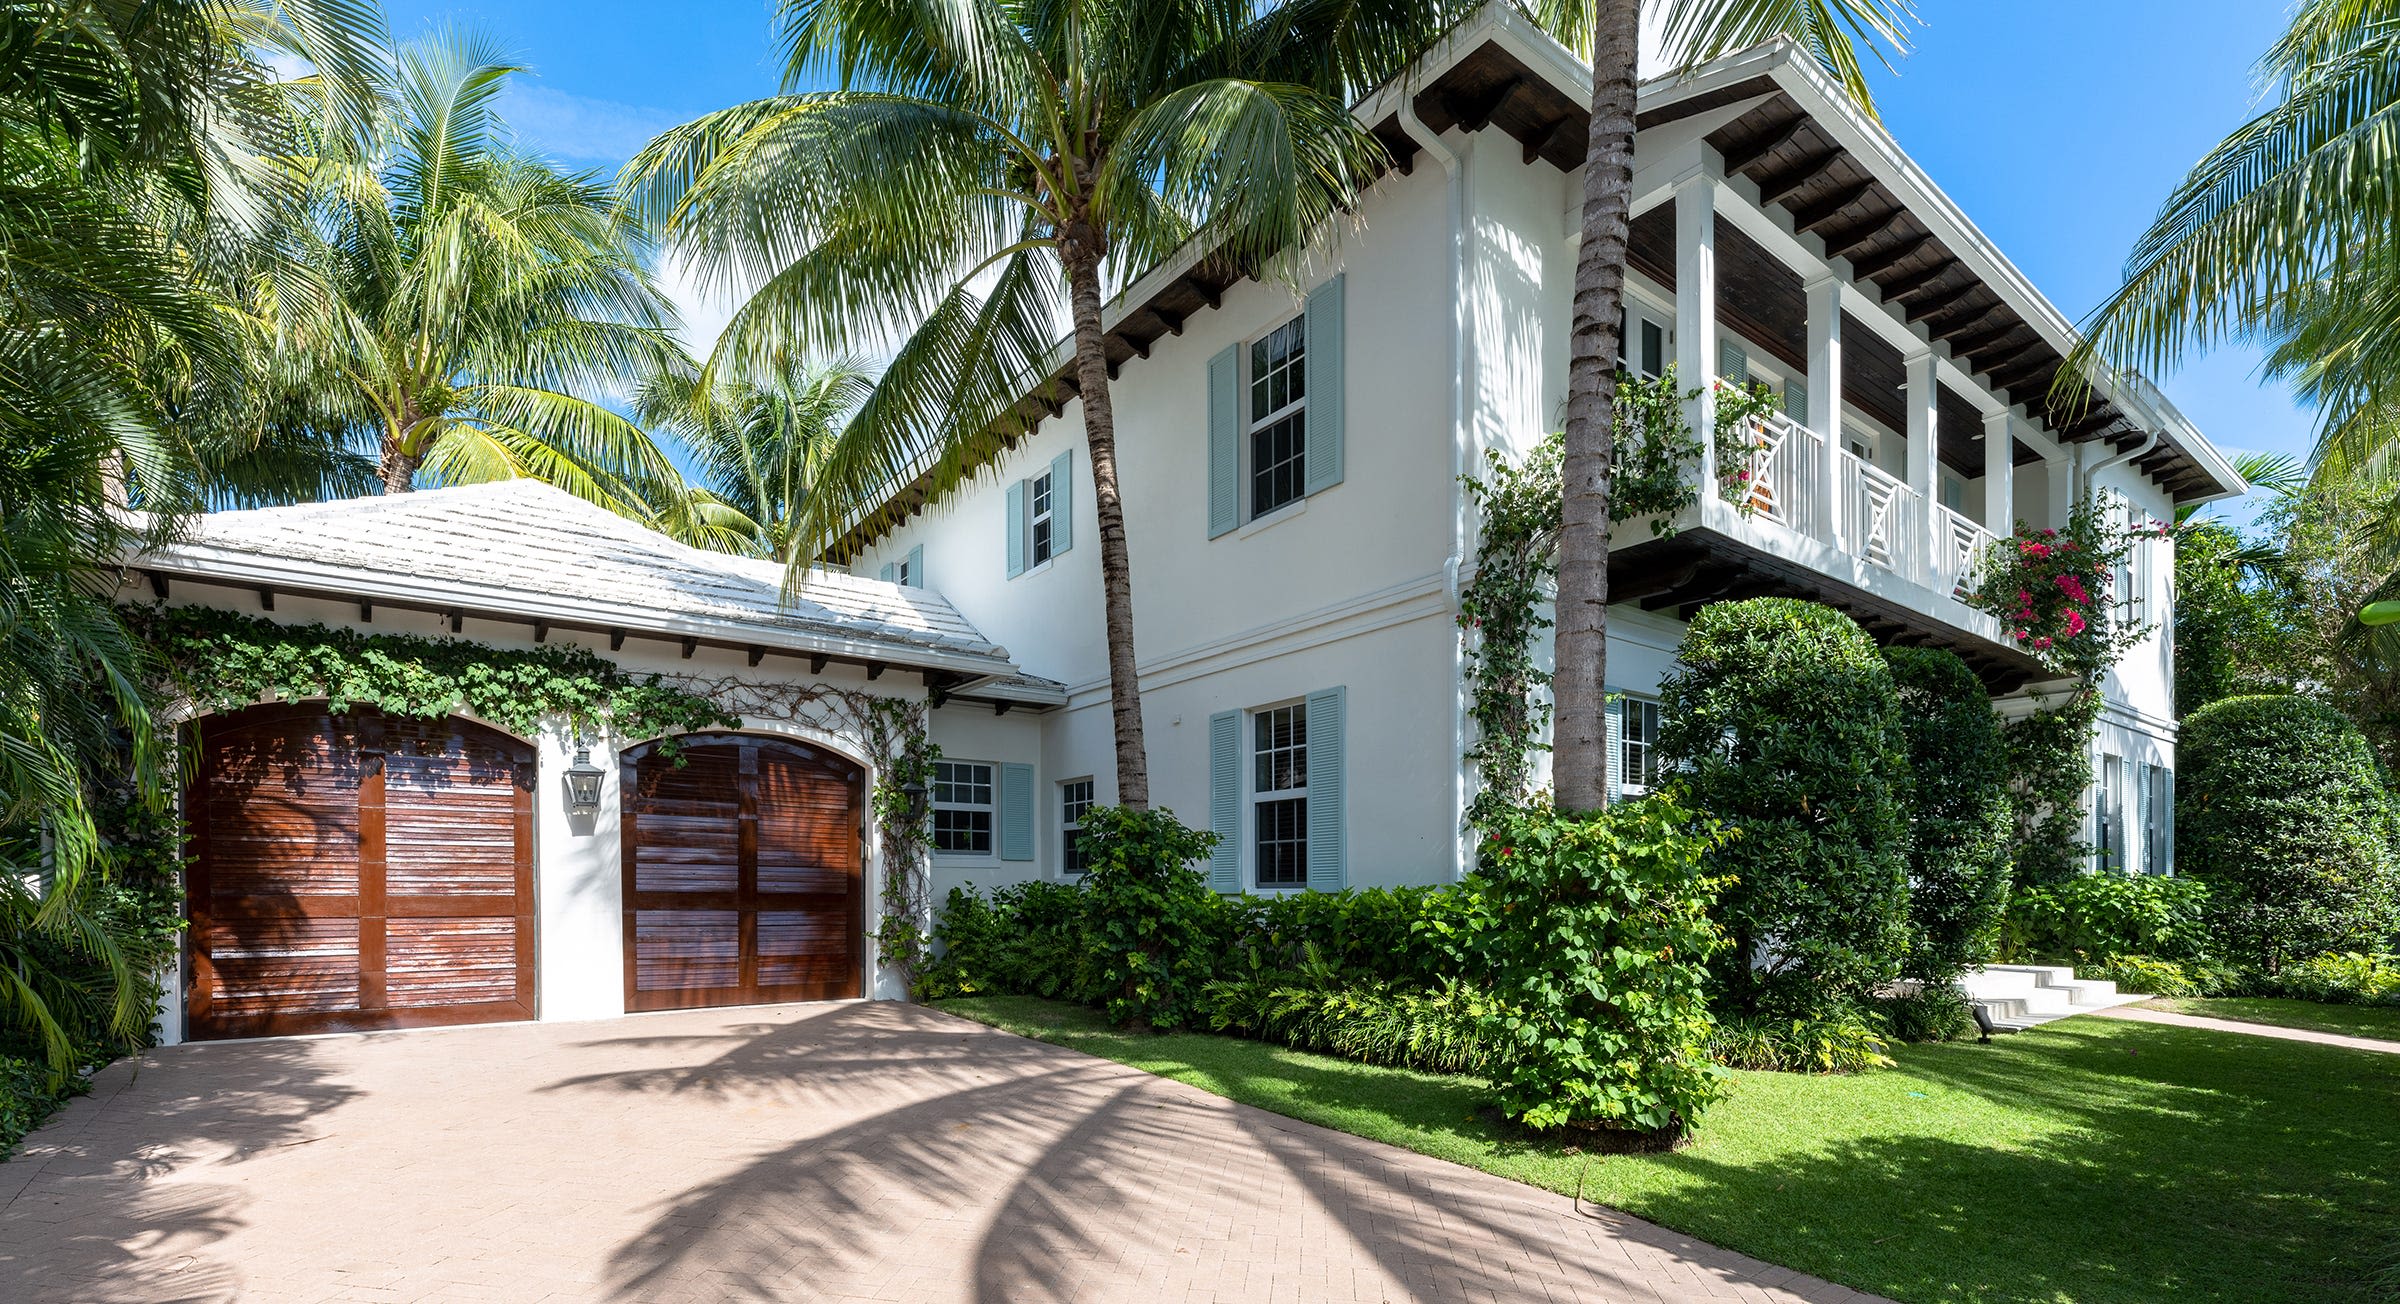 On the market, this Palm Beach home made vacations a treat for the international owners